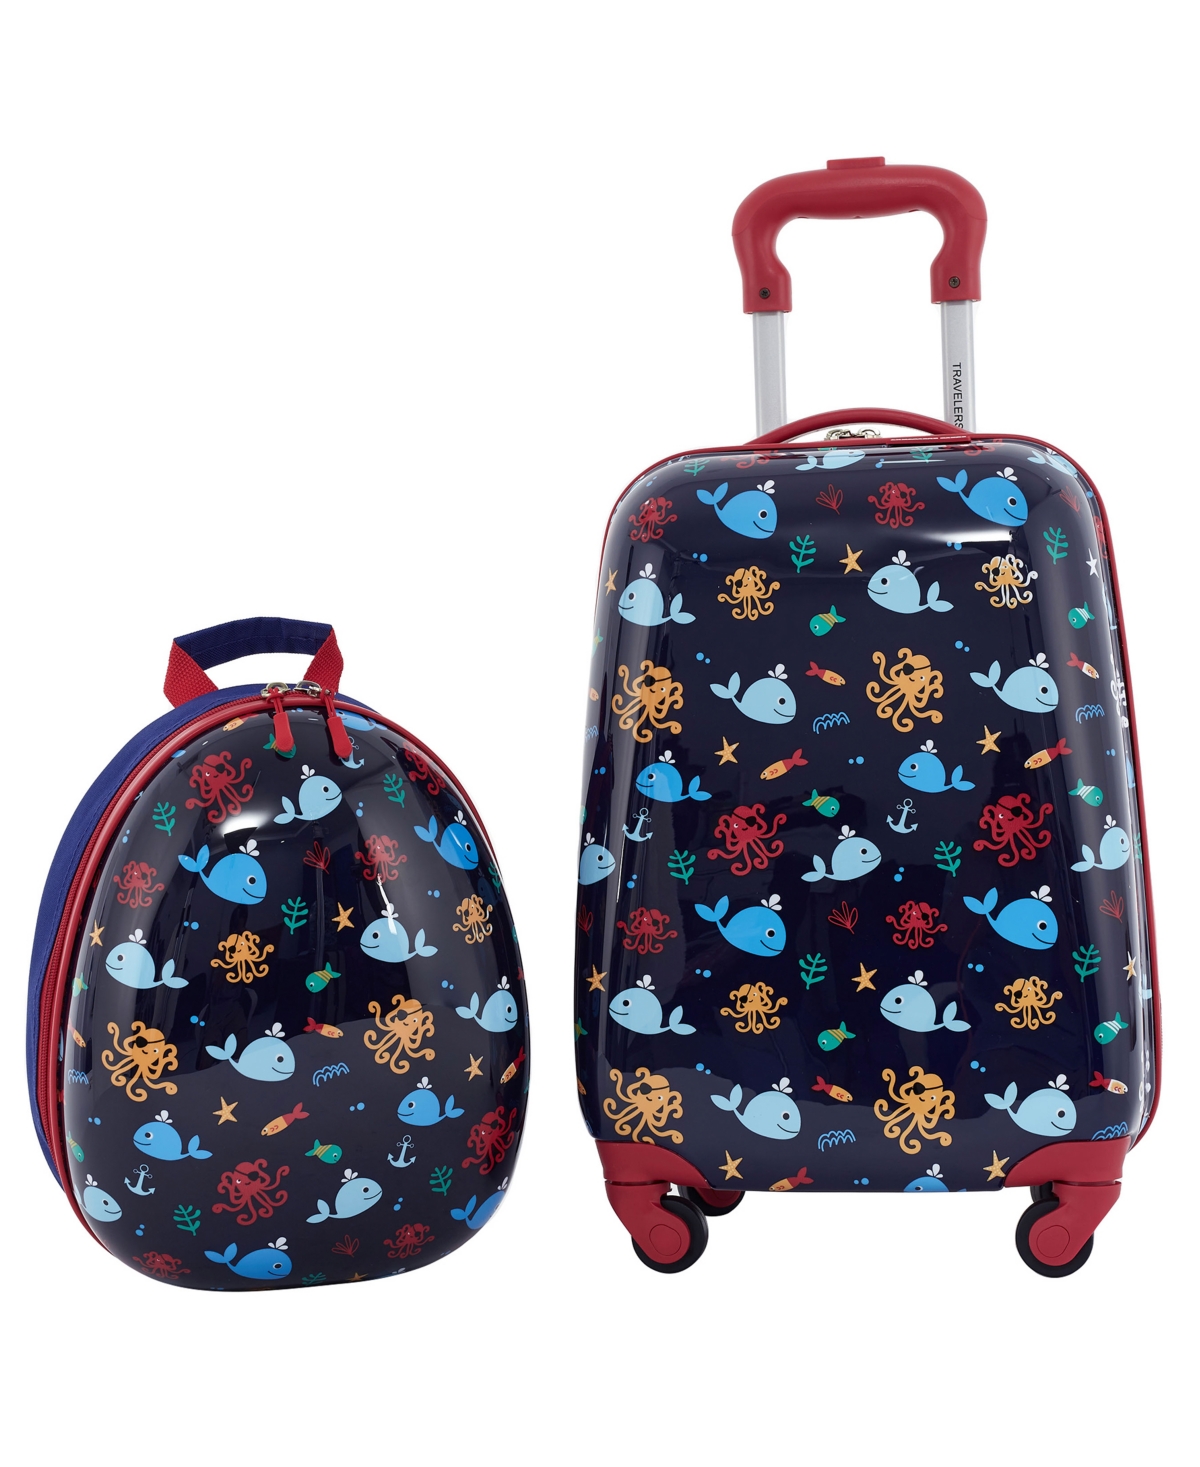 Travelers Club Kids Luggage Set, 2 Piece In Whale